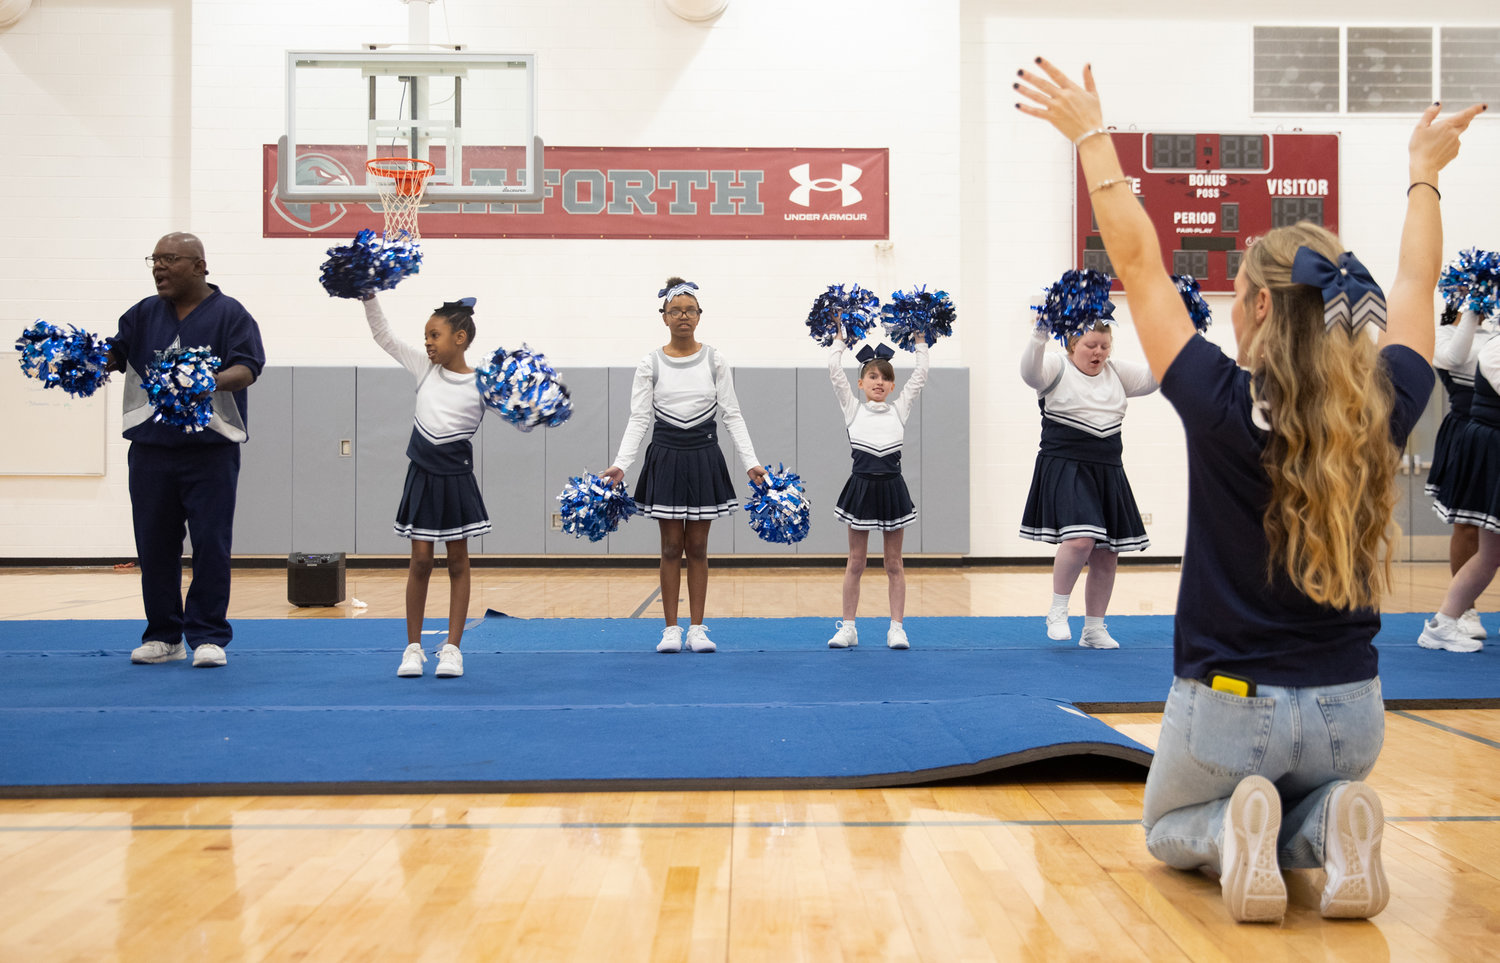 Seaforth High School in Pittsboro hosted the Special Olympics North Carolina statewide cheerleading competition Saturday. Athletes from 14 N.C. counties performed in the event.